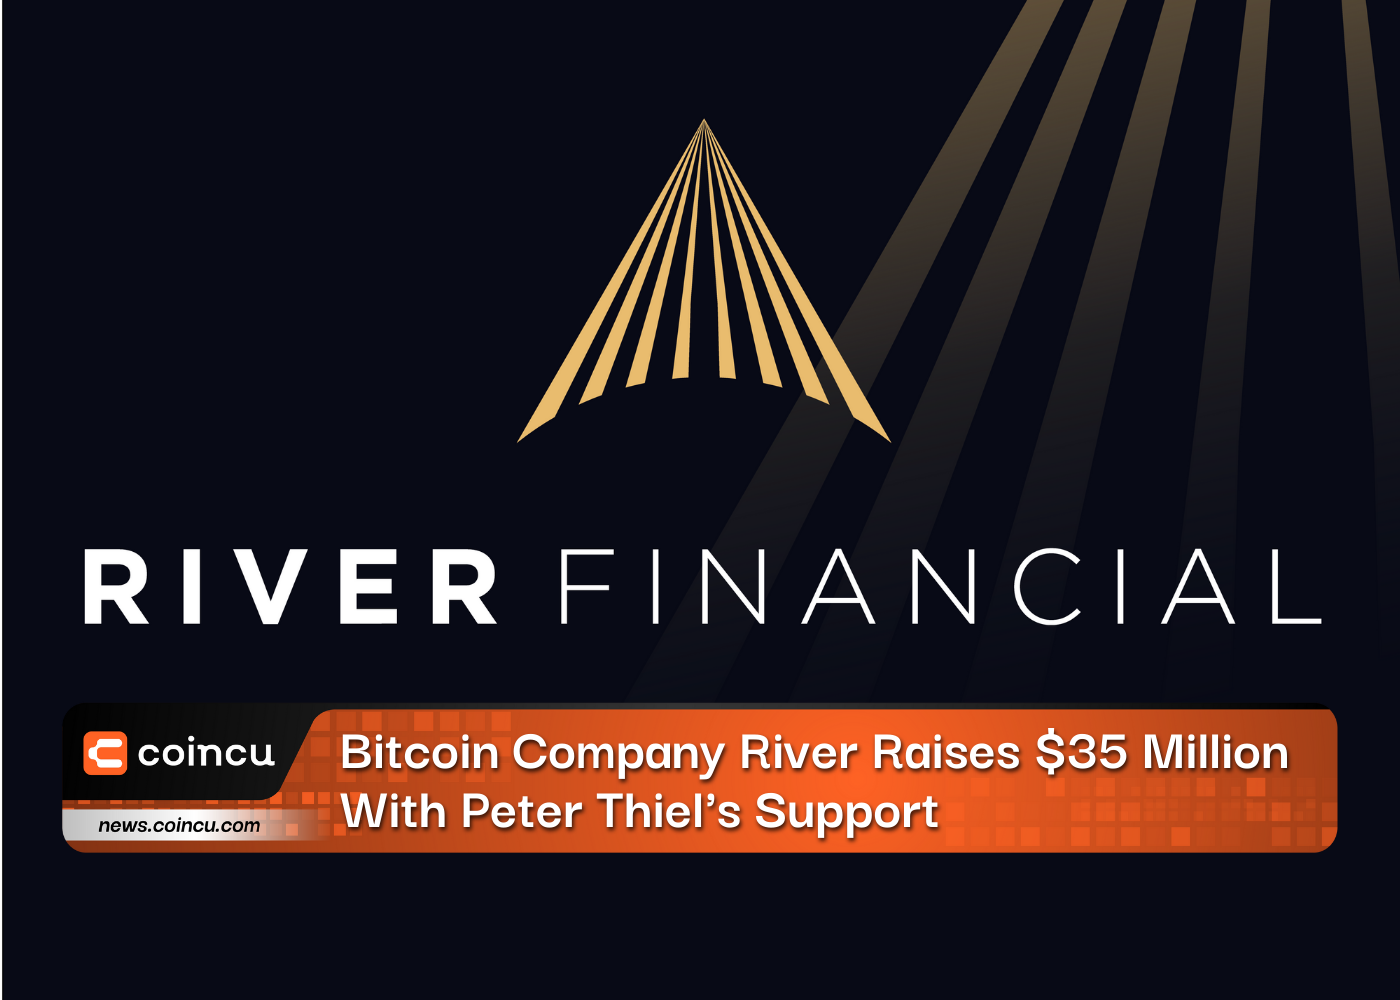 Bitcoin Company River Raises $35 Million With Peter Thiel's Support